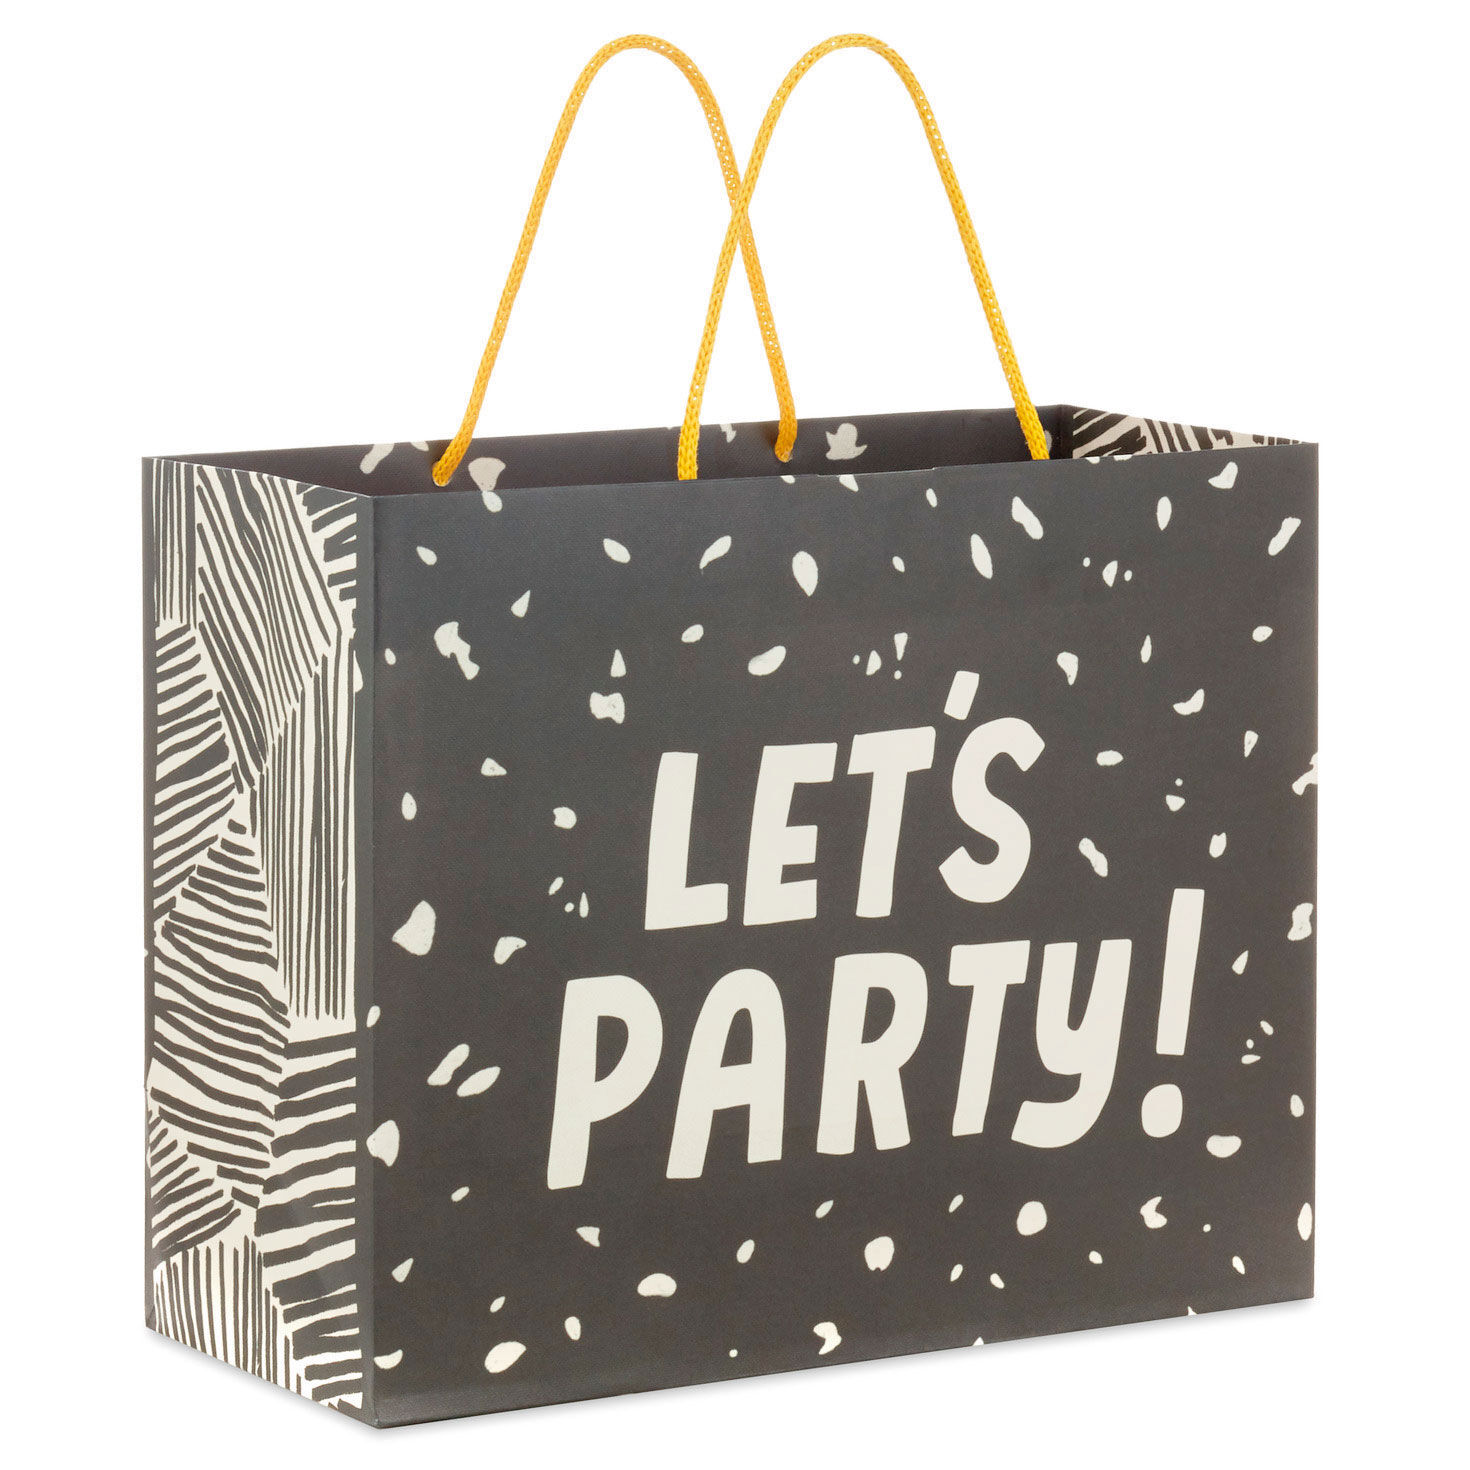 7.7" Horizontal Let's Party Medium Gift Bag for only USD 3.49 | Hallmark